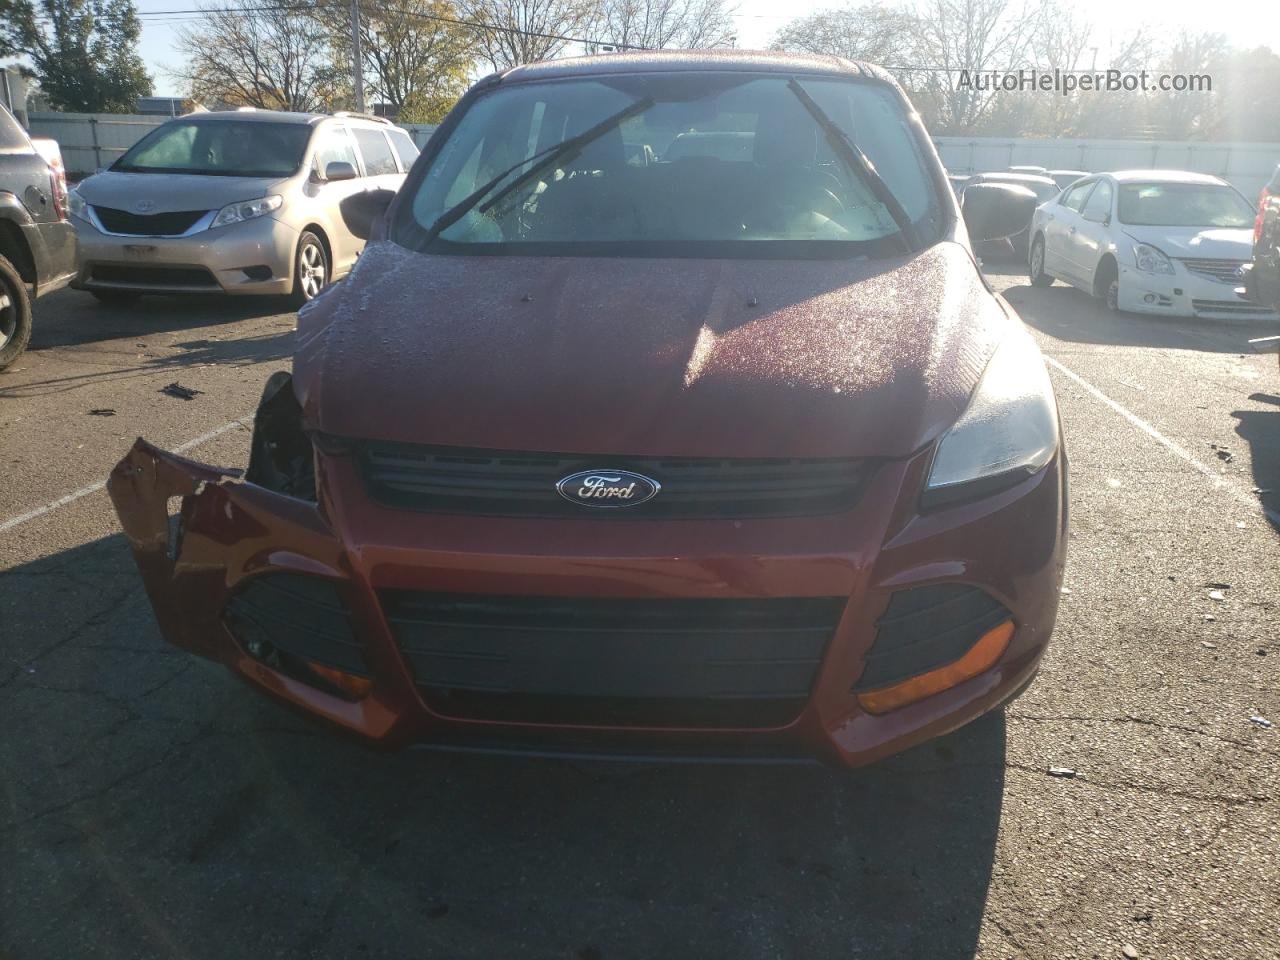 2015 Ford Escape S Бордовый vin: 1FMCU0F73FUB38327